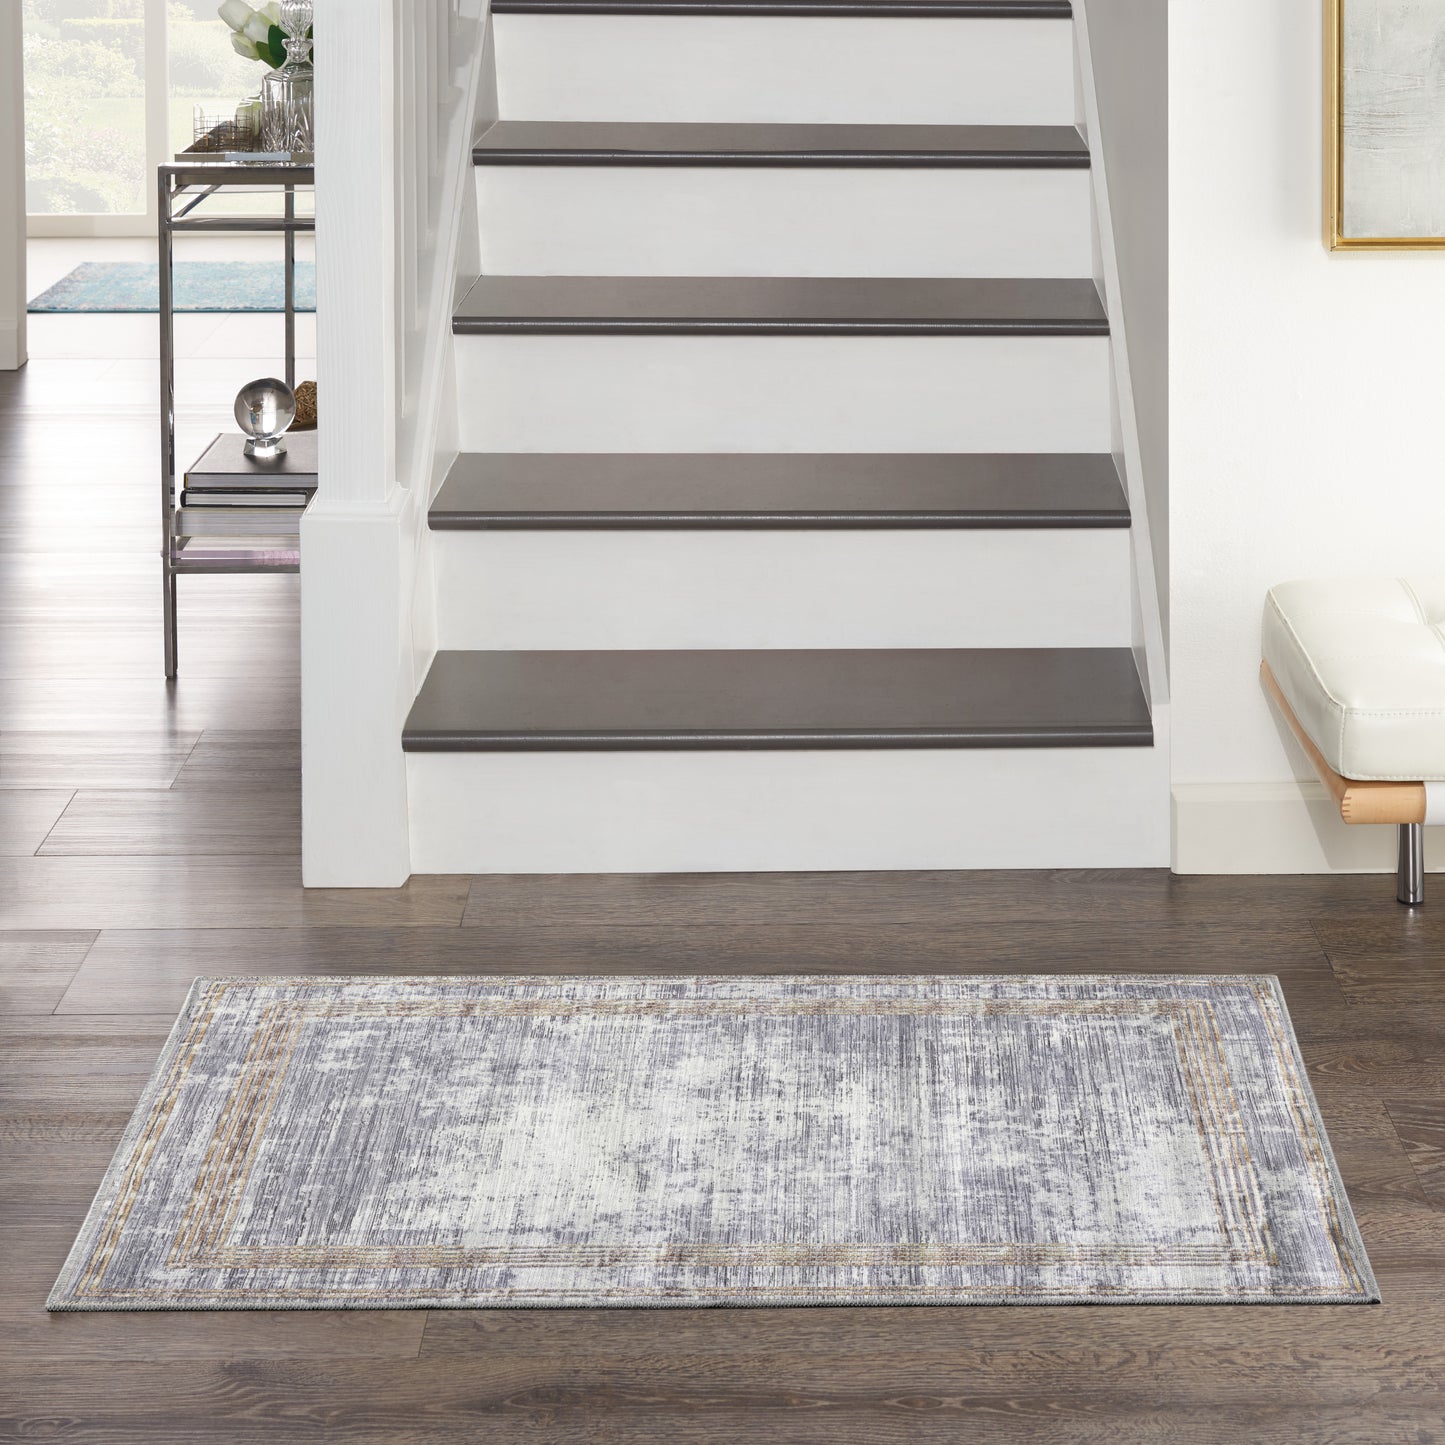 Inspire Me! Home Décor Daydream DDR03 Silver  Contemporary Machinemade Rug